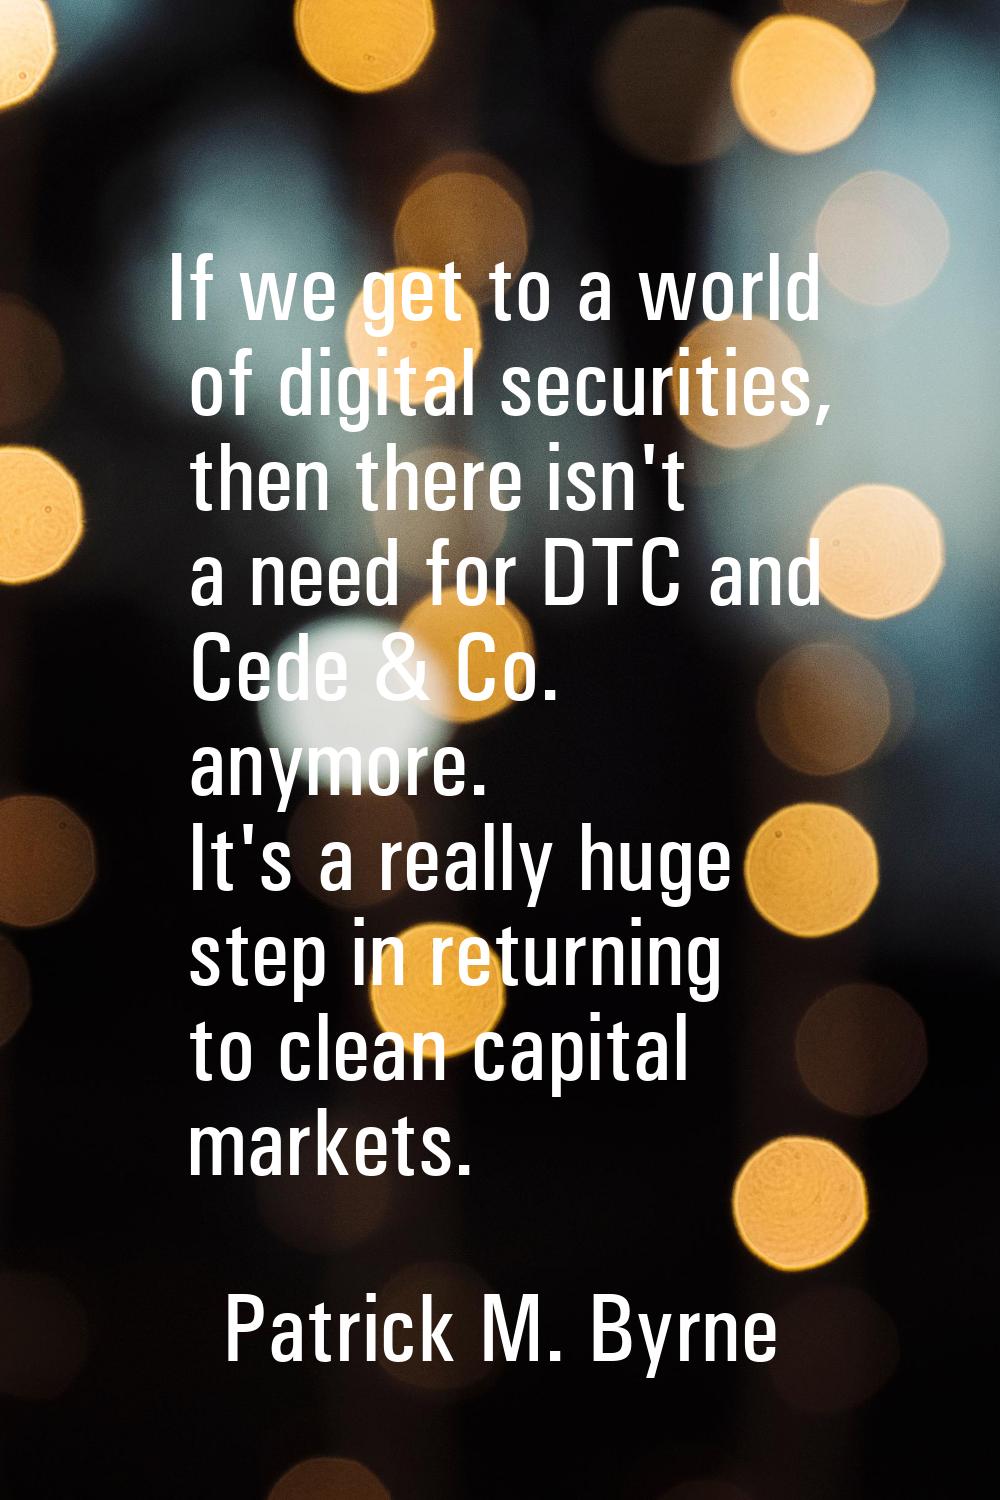 If we get to a world of digital securities, then there isn't a need for DTC and Cede & Co. anymore.